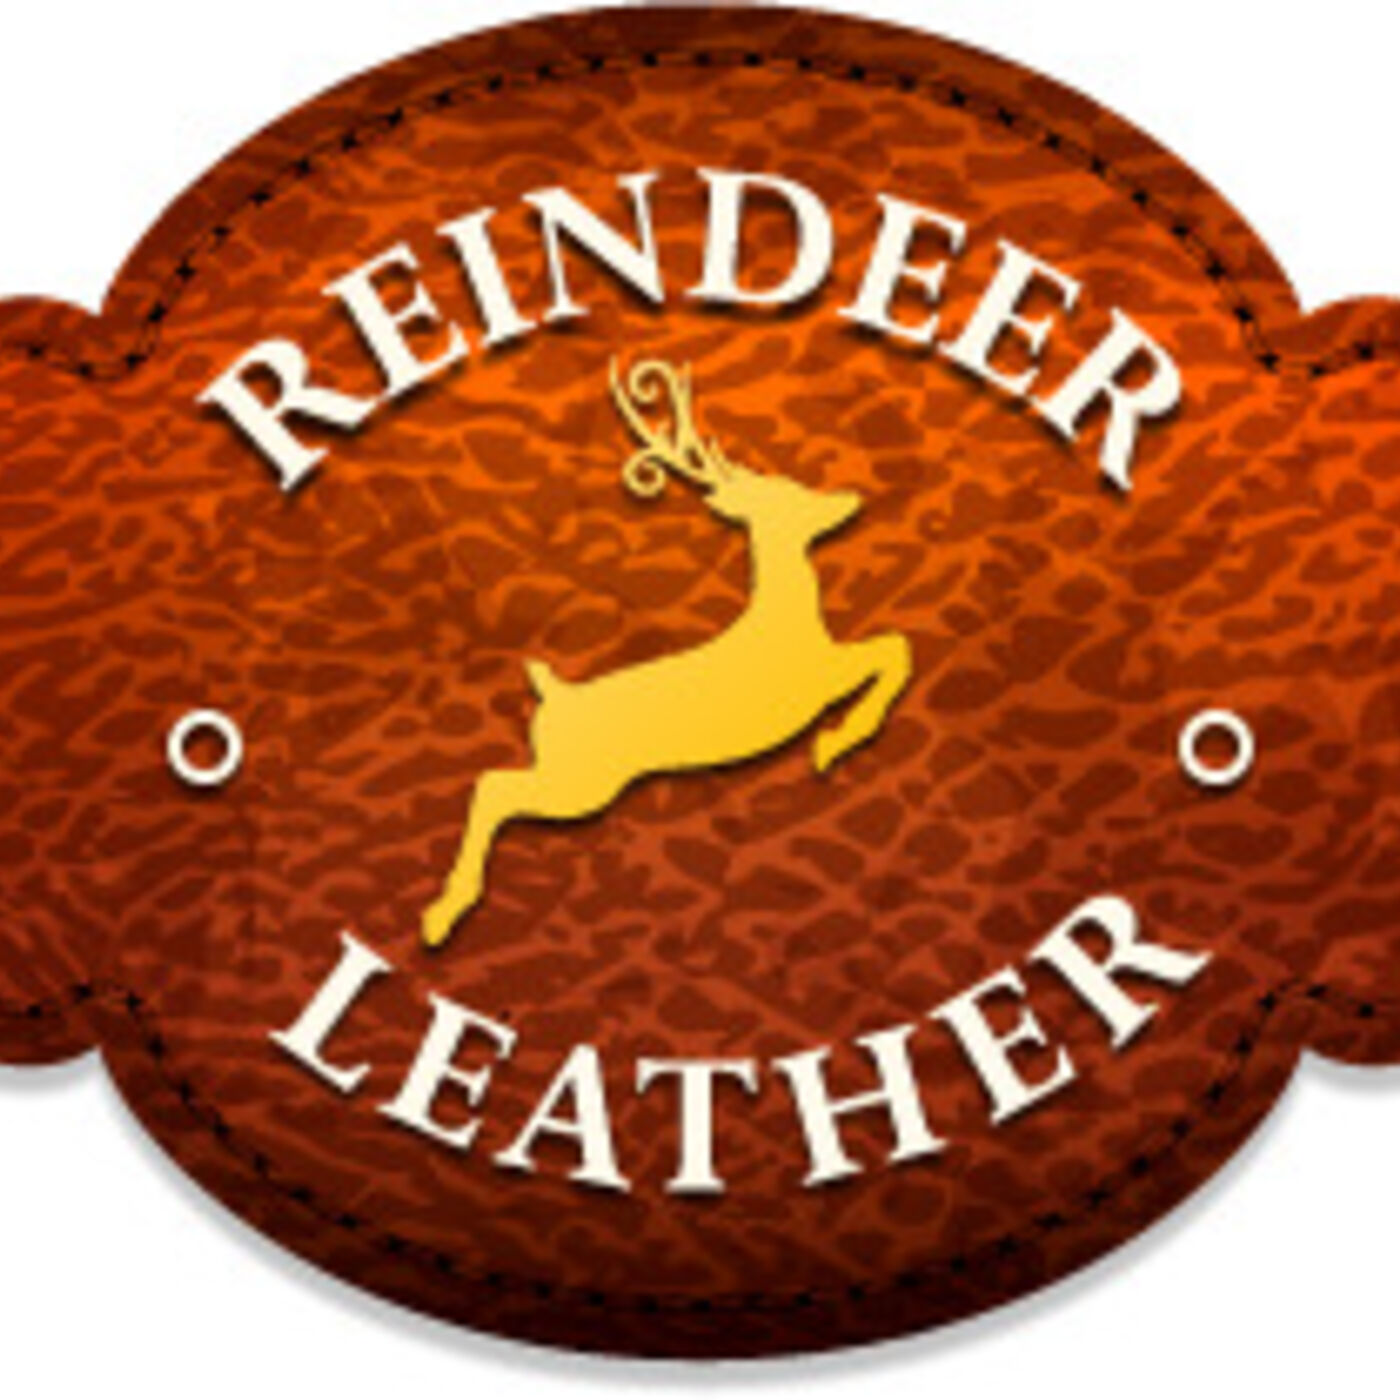 Reindeer Leather's Podcast